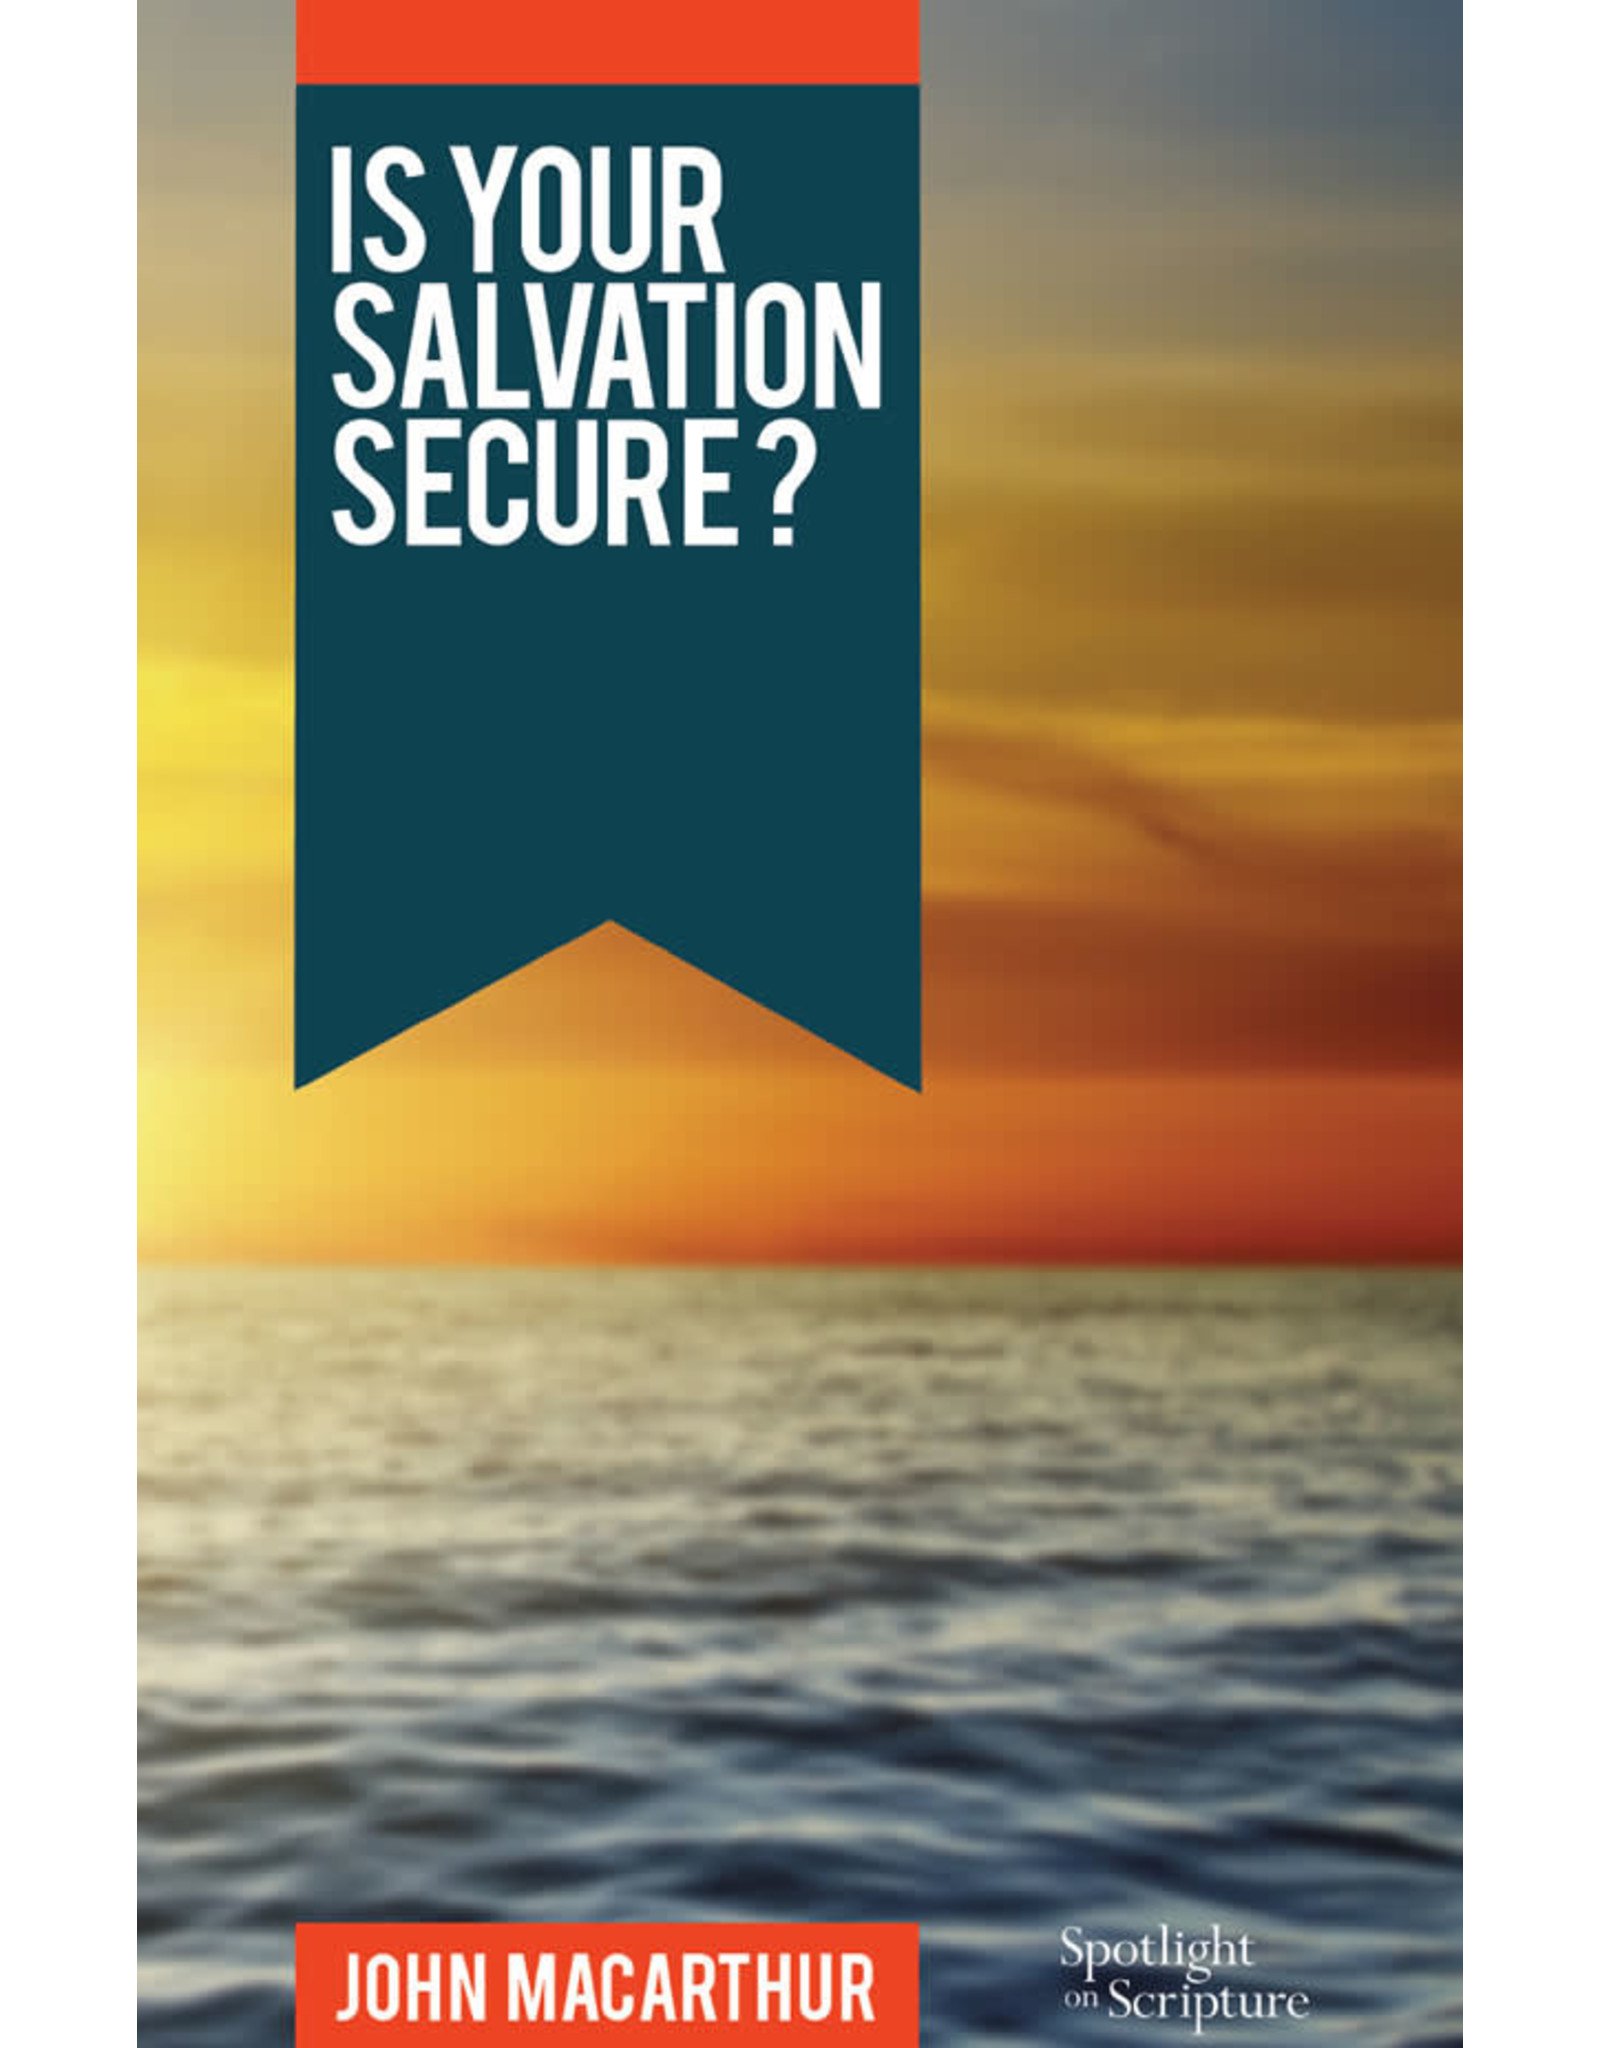 Grace to You (GTY) Is Your Salvation Secure?